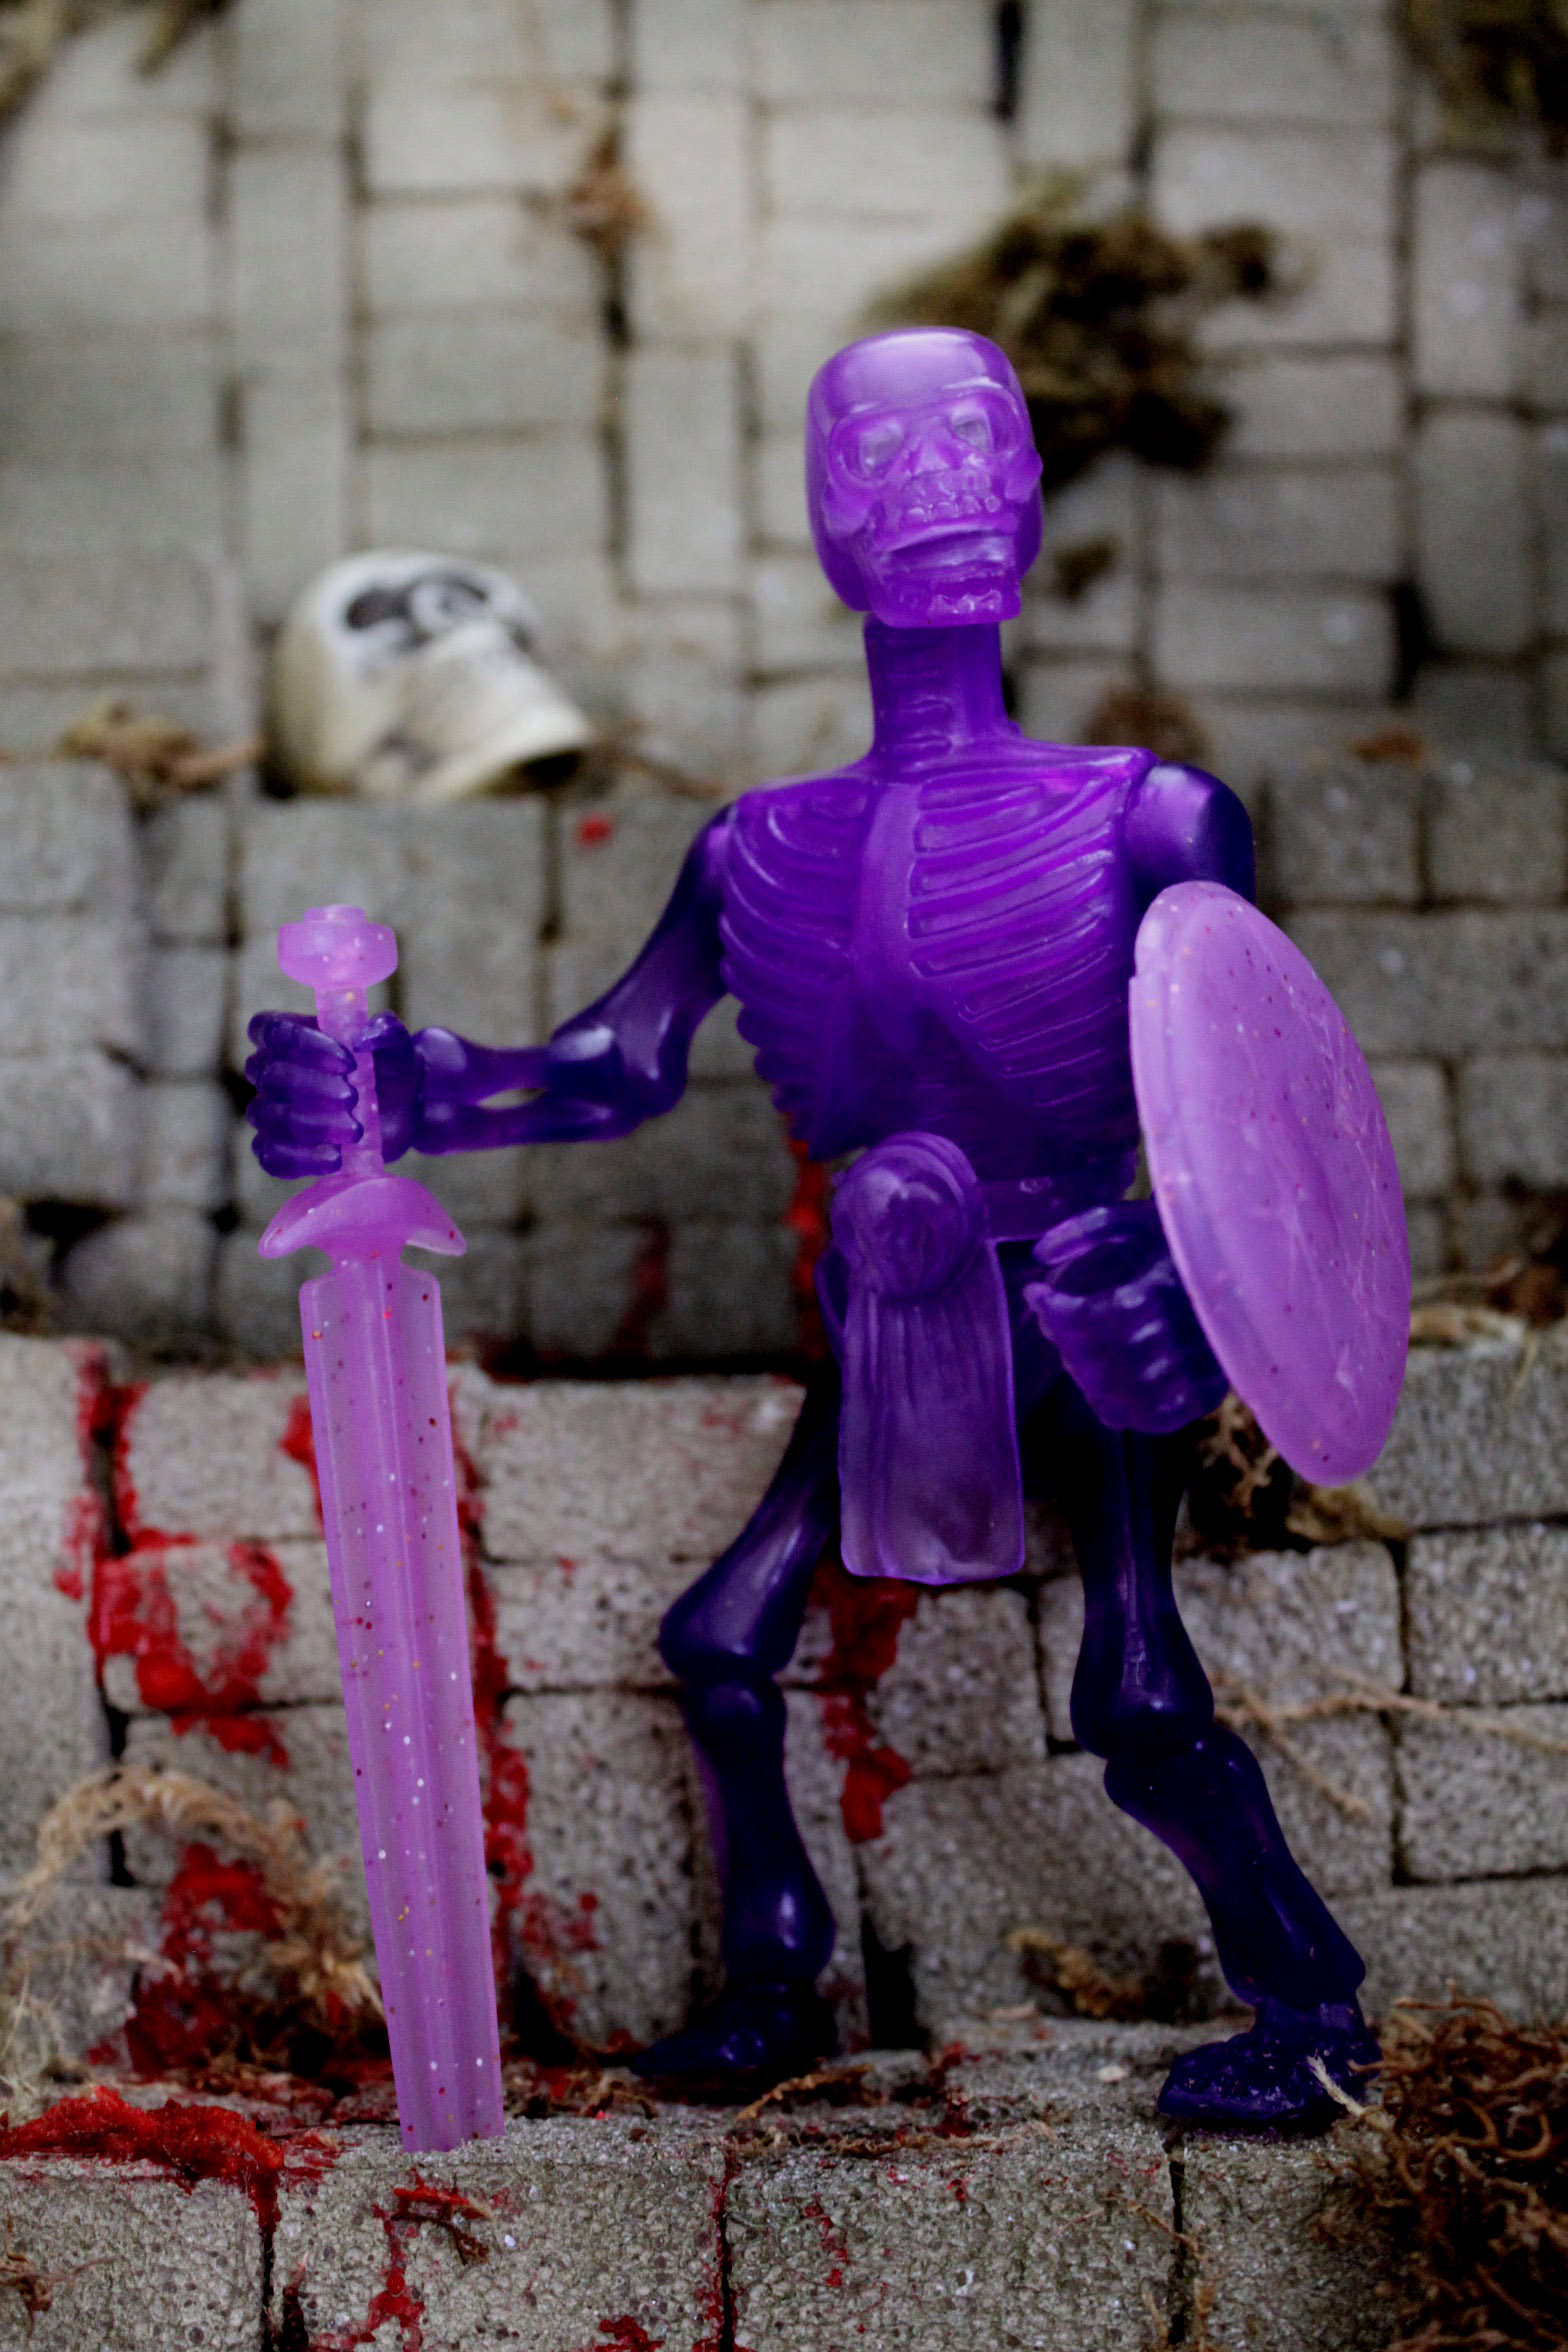 Swamp Drone Purple Specter Slime Drones Action Figure - Click Image to Close